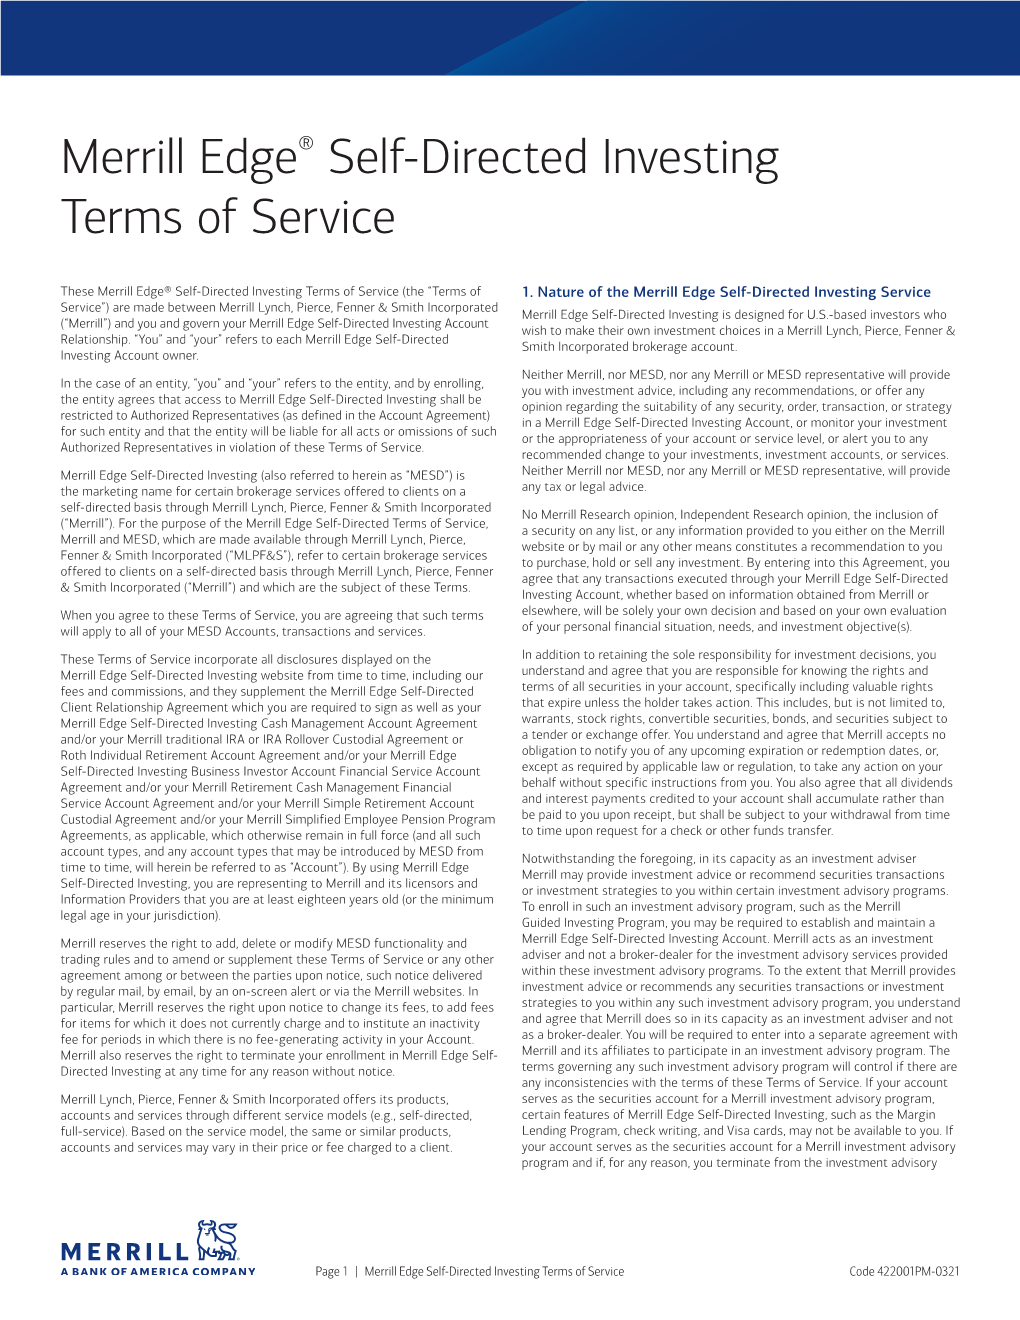 Merrill Edge® Self-Directed Investing Terms of Service